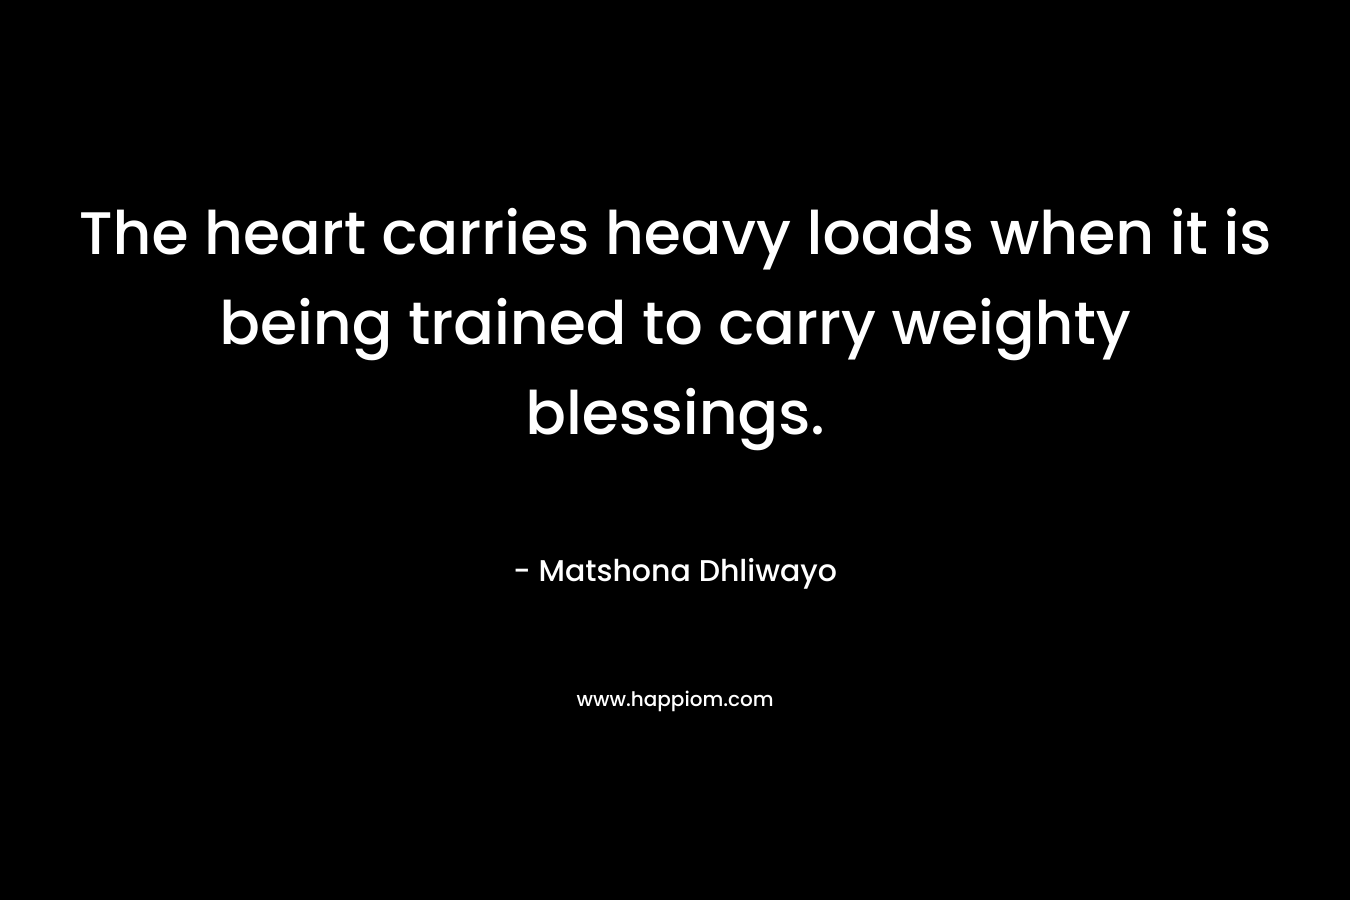 The heart carries heavy loads when it is being trained to carry weighty blessings. – Matshona Dhliwayo